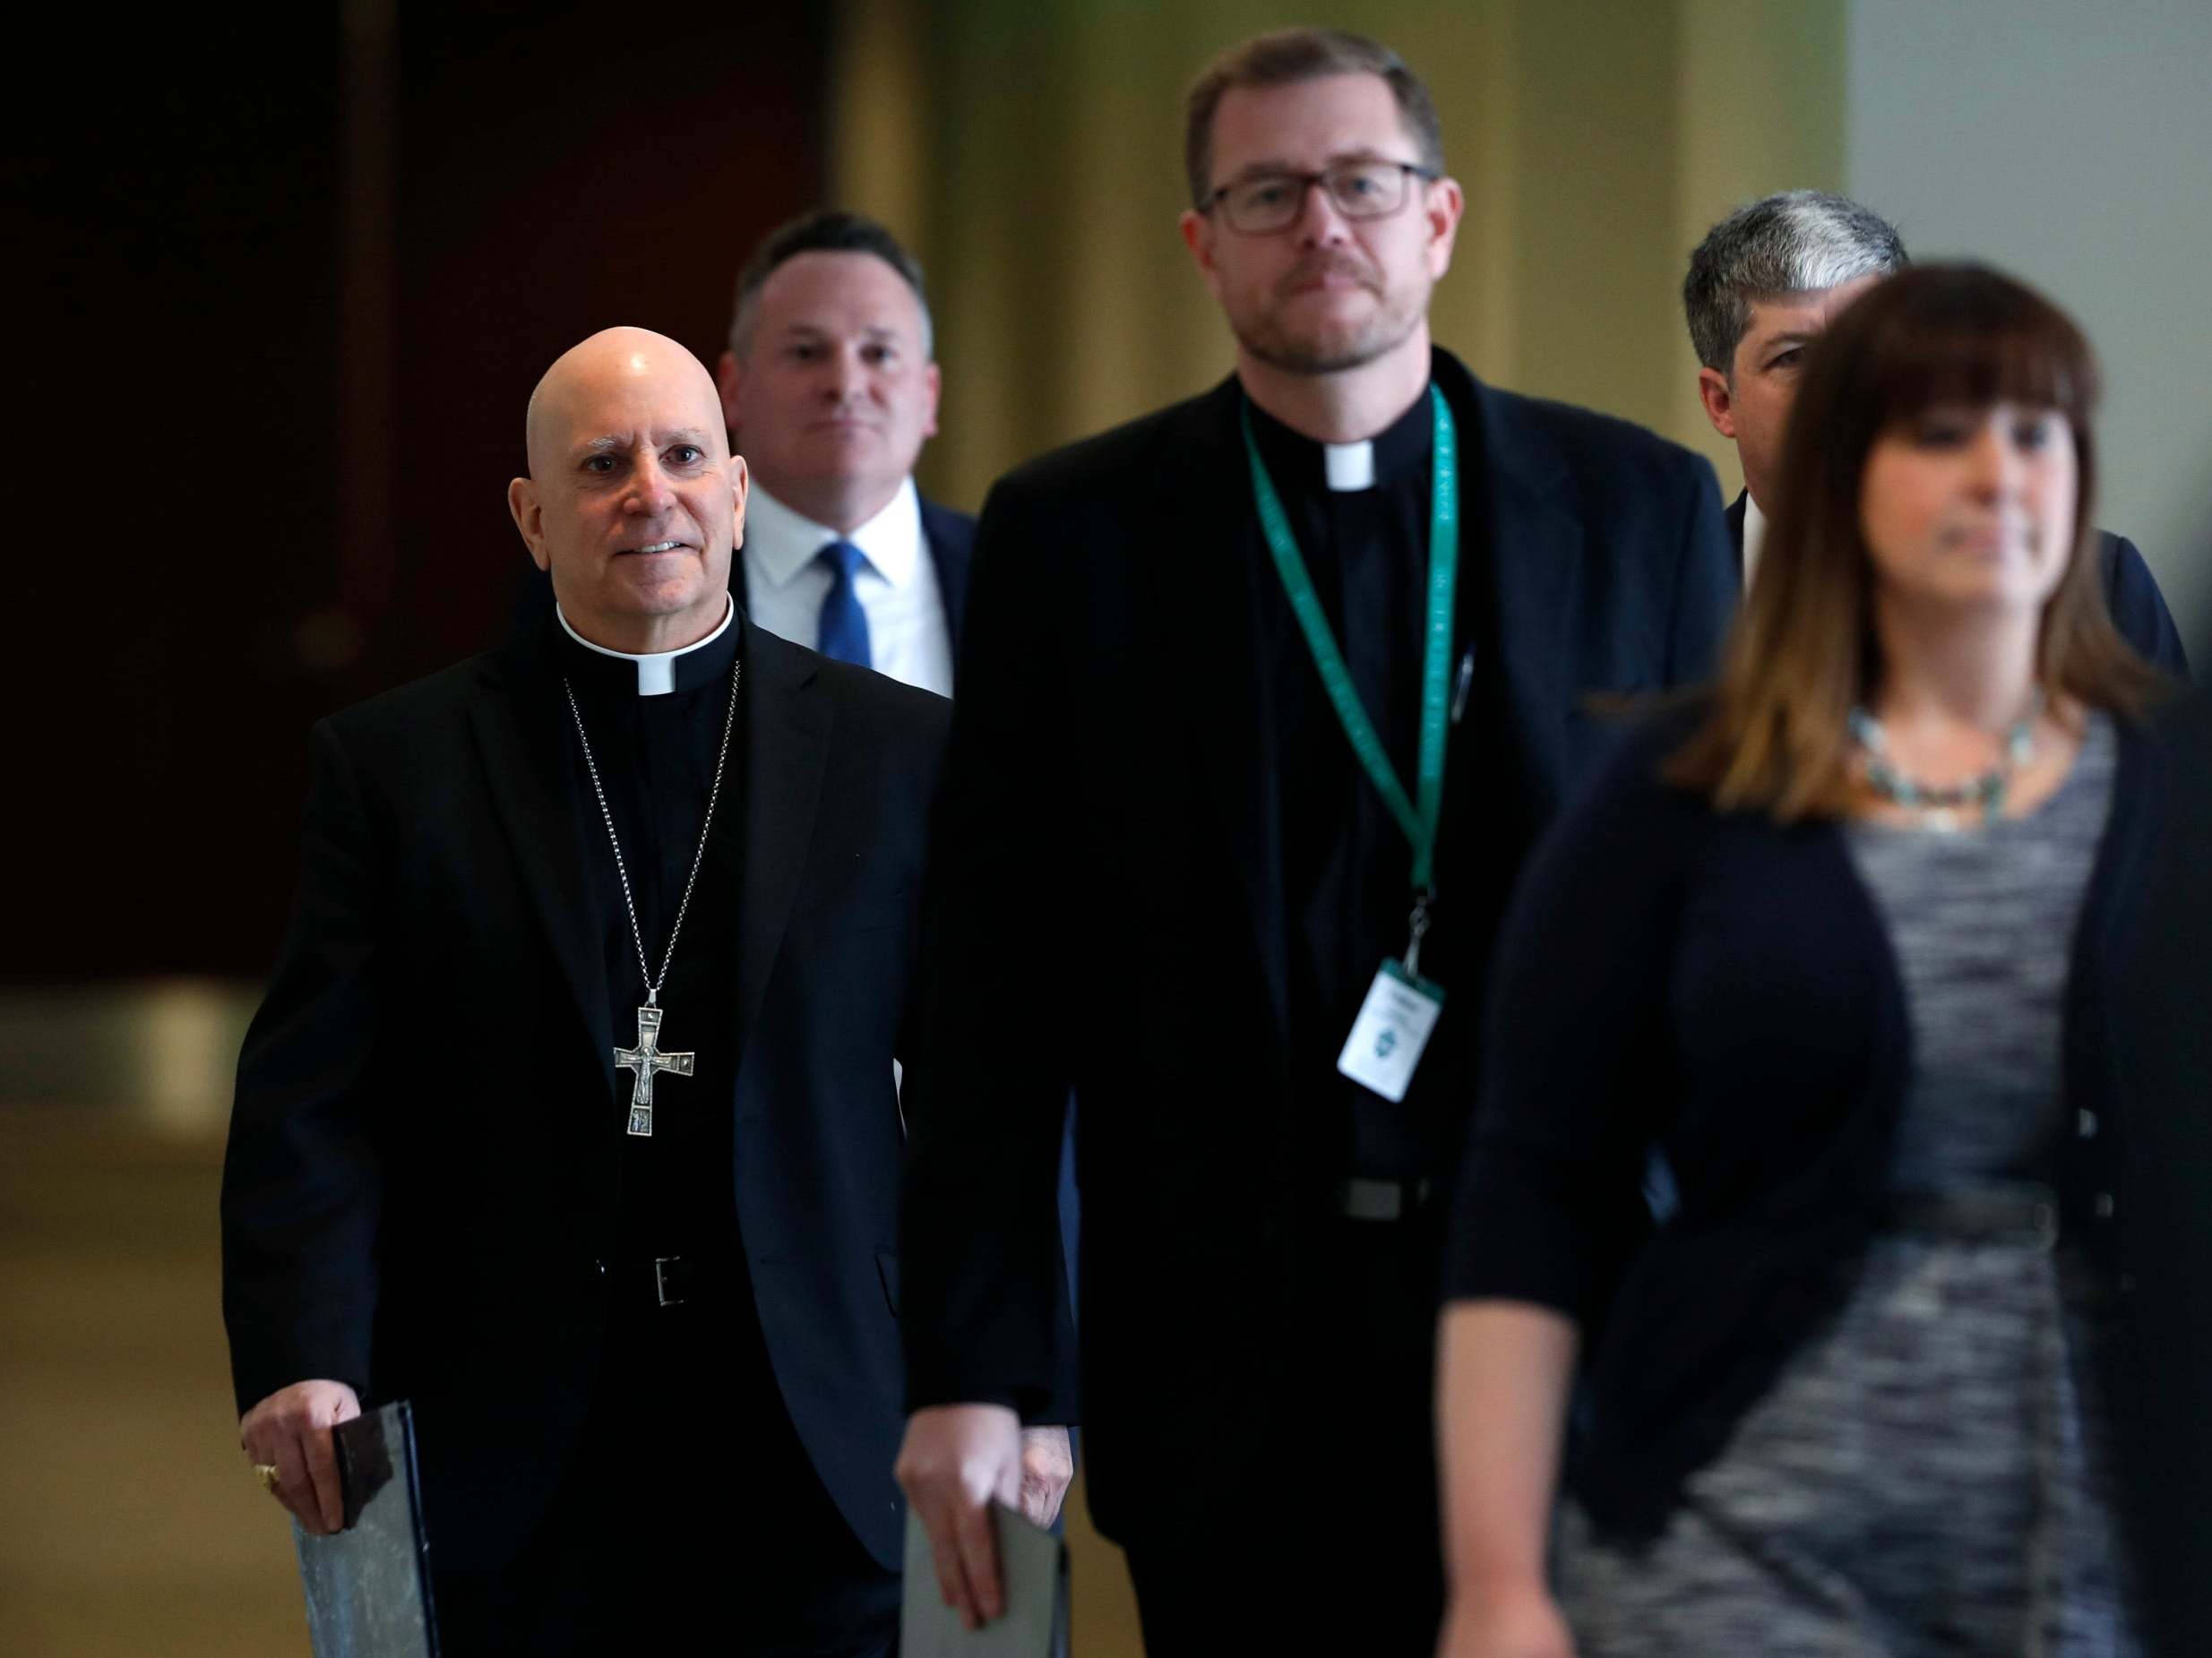 Samuel Aquila, archbishop of the Denver diocese of the Roman Catholic Church, left, trails Very Rev. Randy Dollins, vicar general, into a news conference at which a plan was revealed to have a former prosecutor review their diocese's sexual abuse files